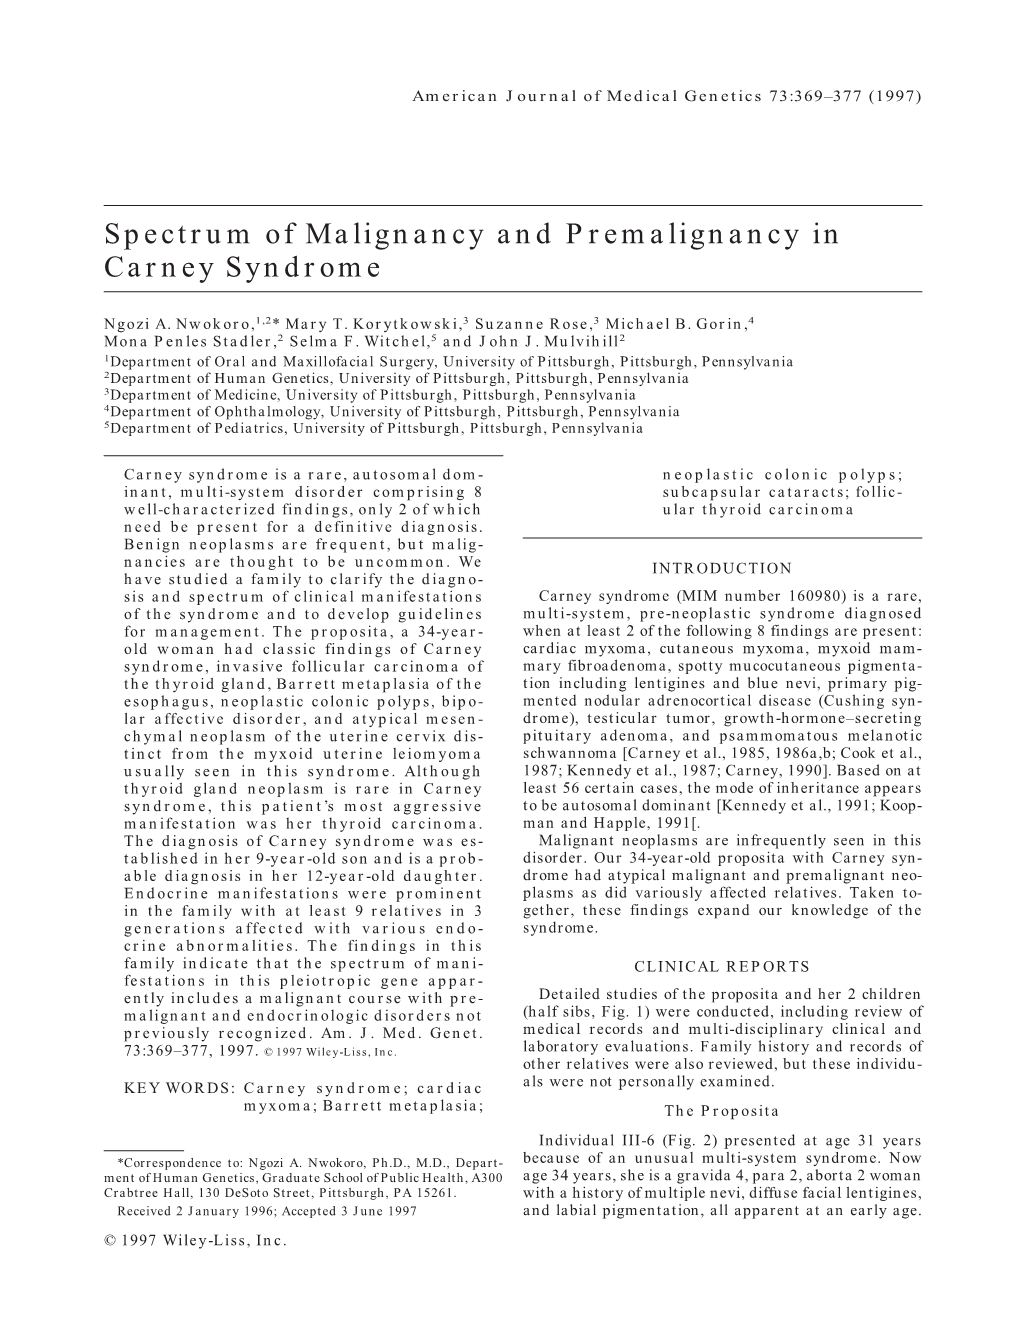 Spectrum of Malignancy and Premalignancy in Carney Syndrome